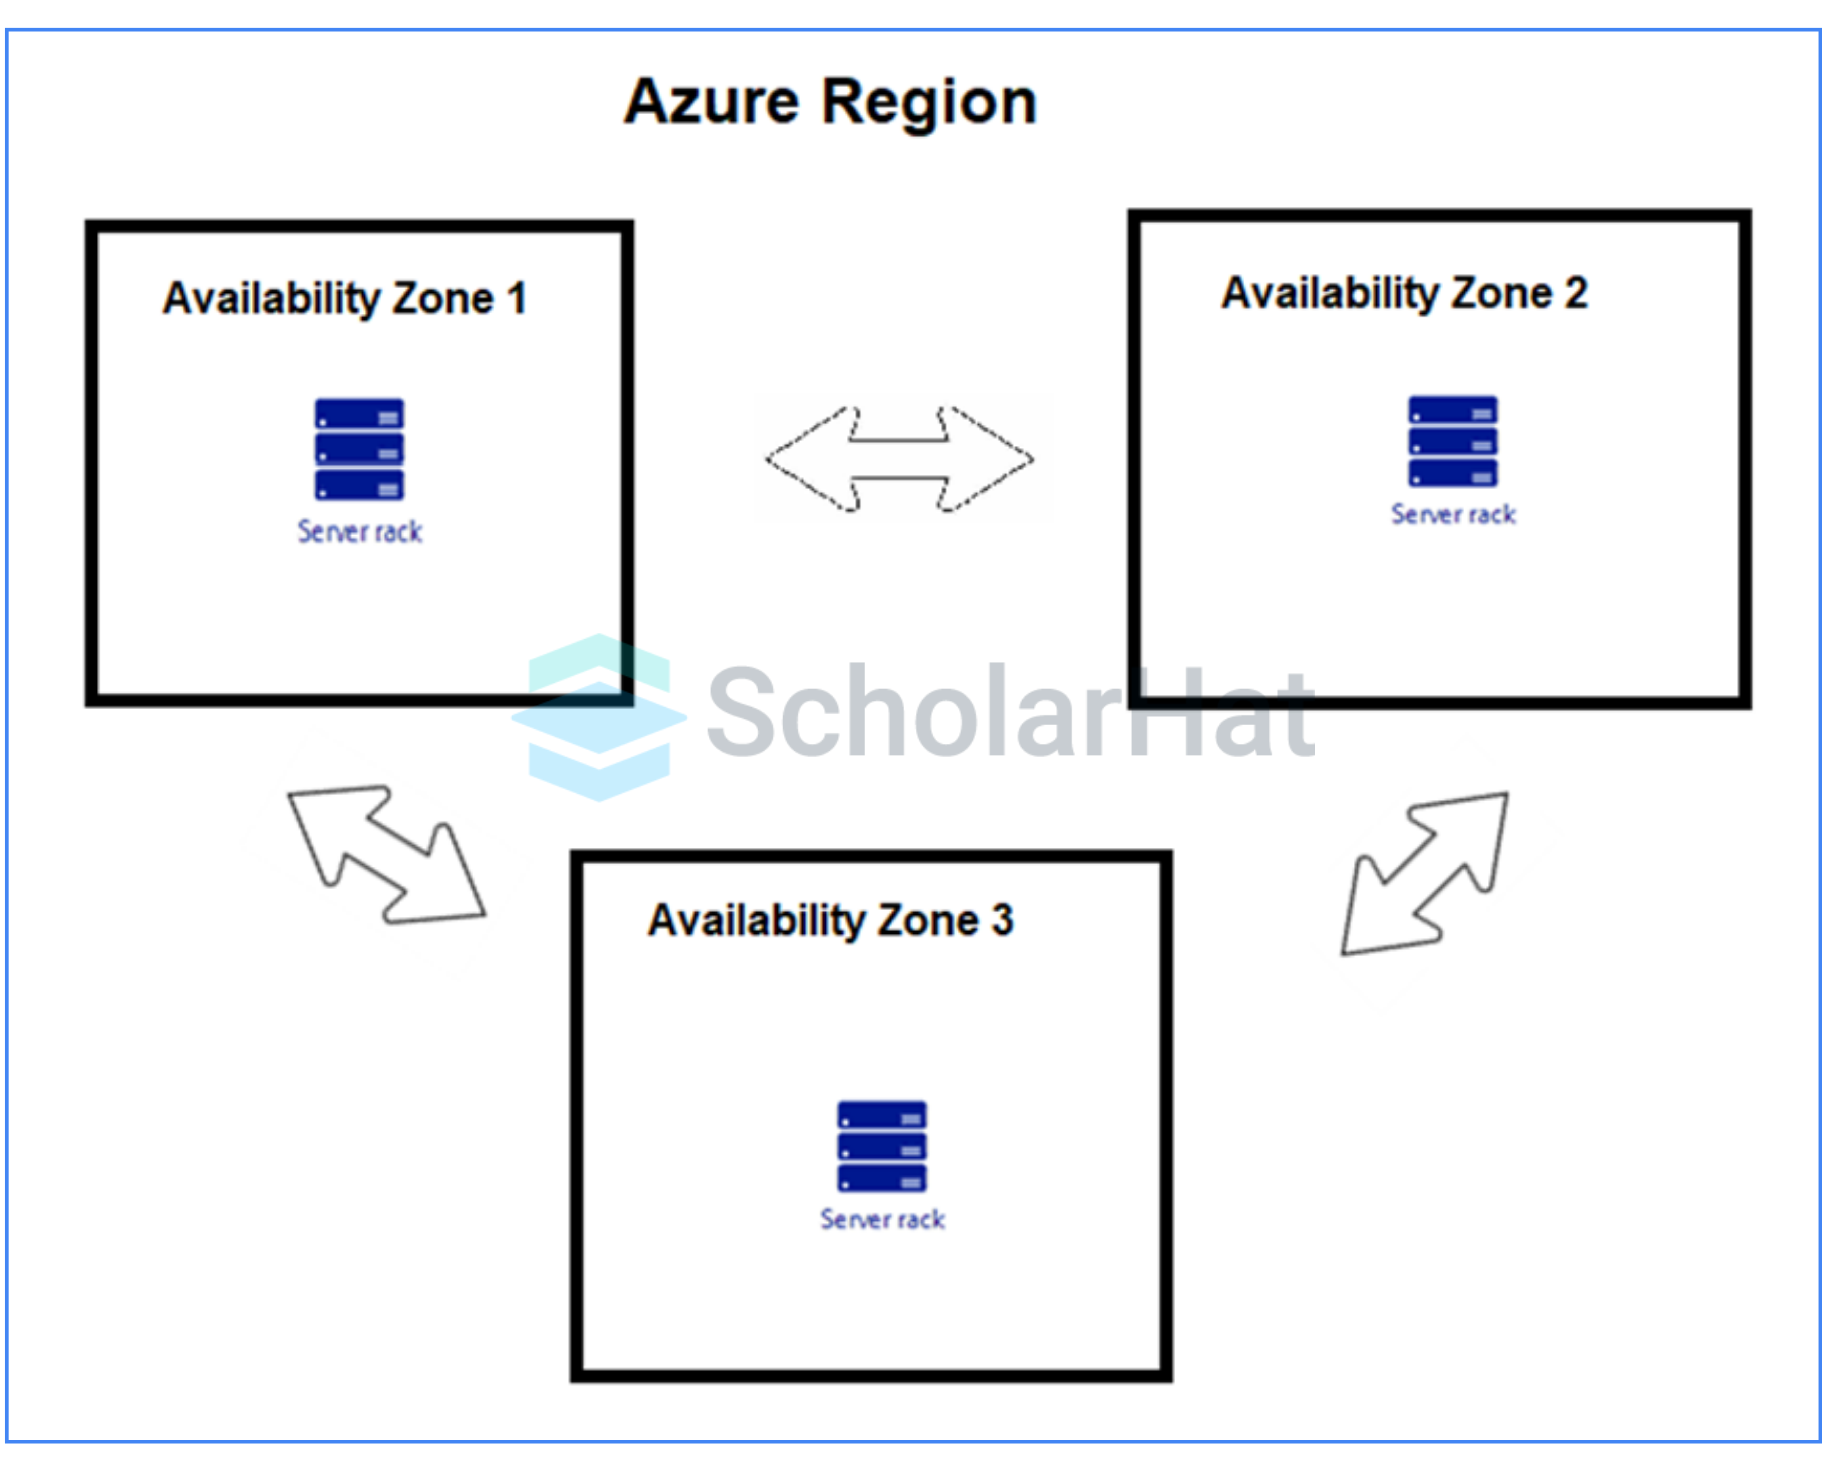 What is the Availability Zone in Azure?